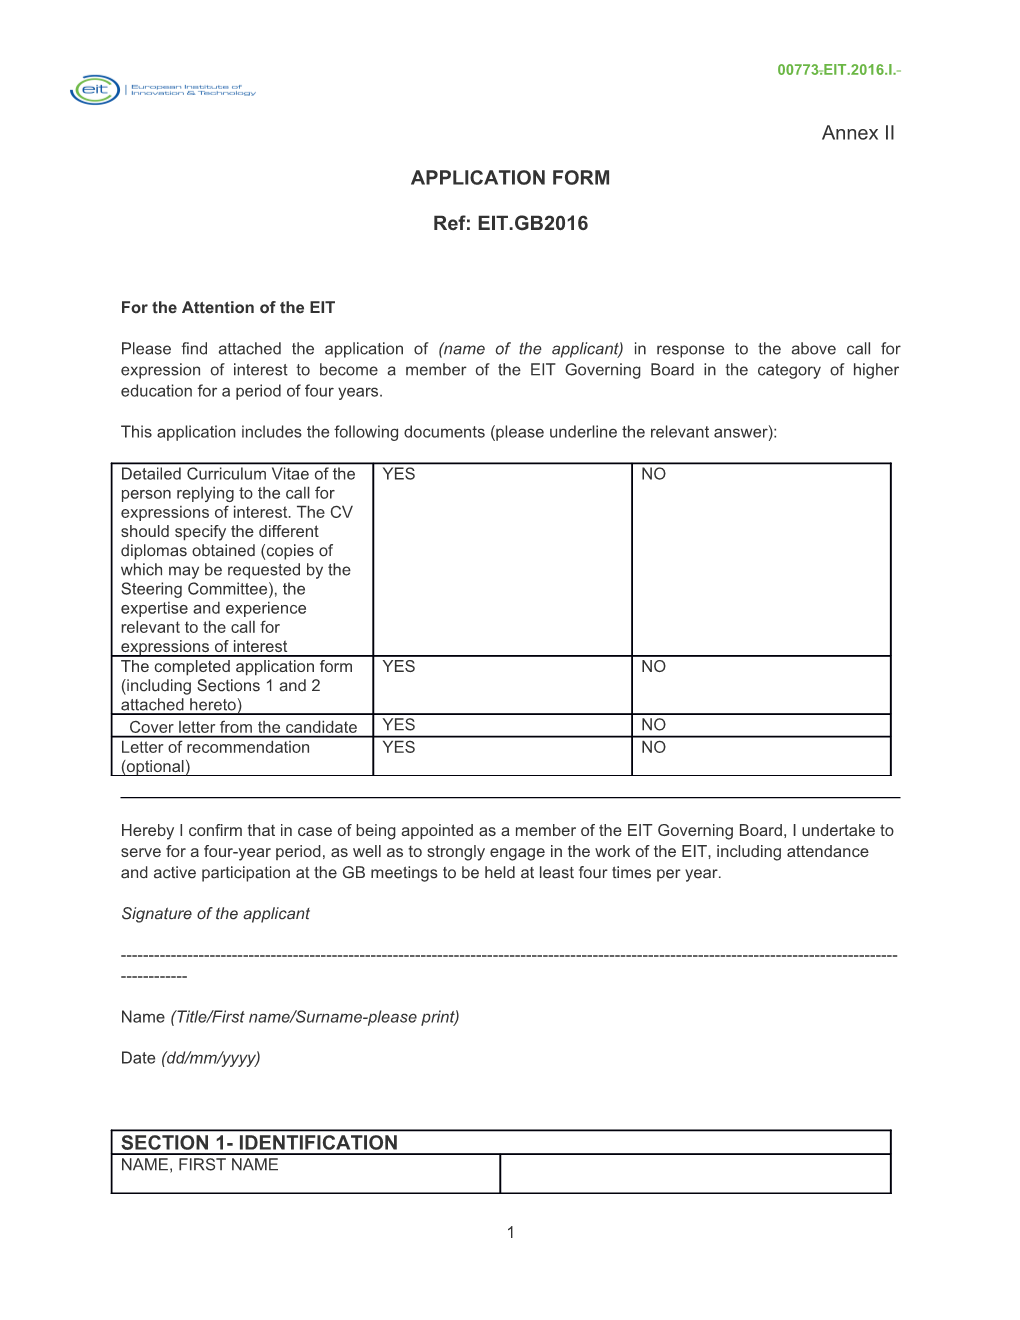 Application Form s60